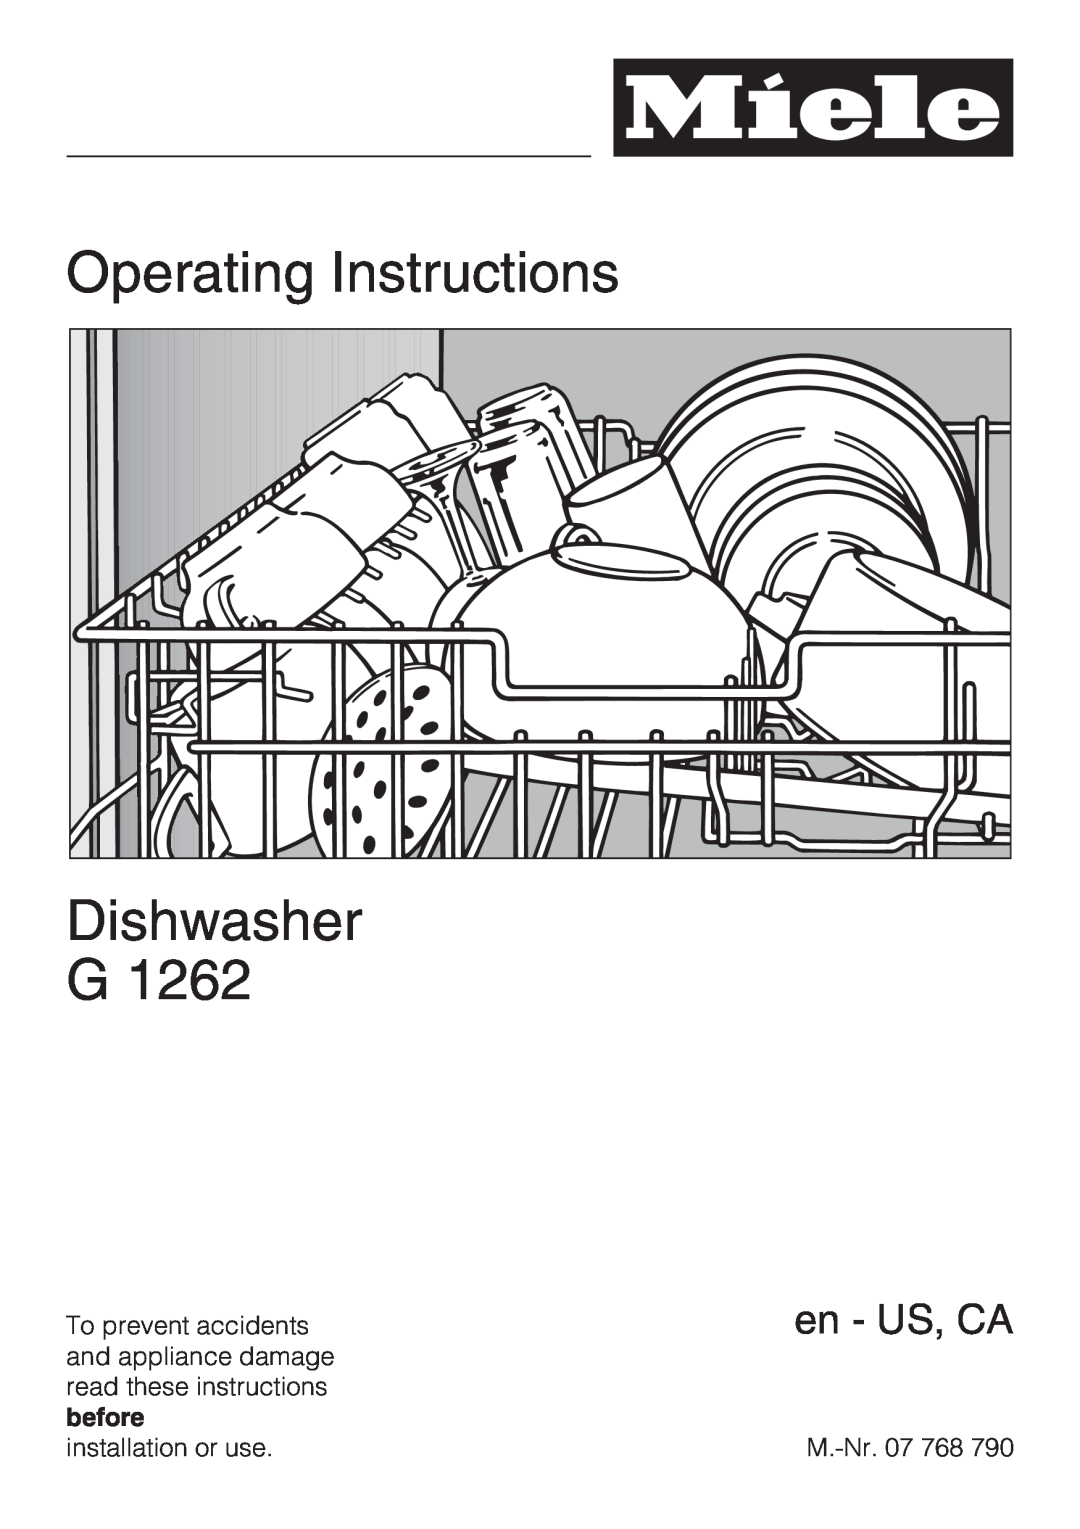 Miele G 1262 user manual User guide MIELE G 575 DISHWASHER, Operating instructions MIELE G 575 DISHWASHER 